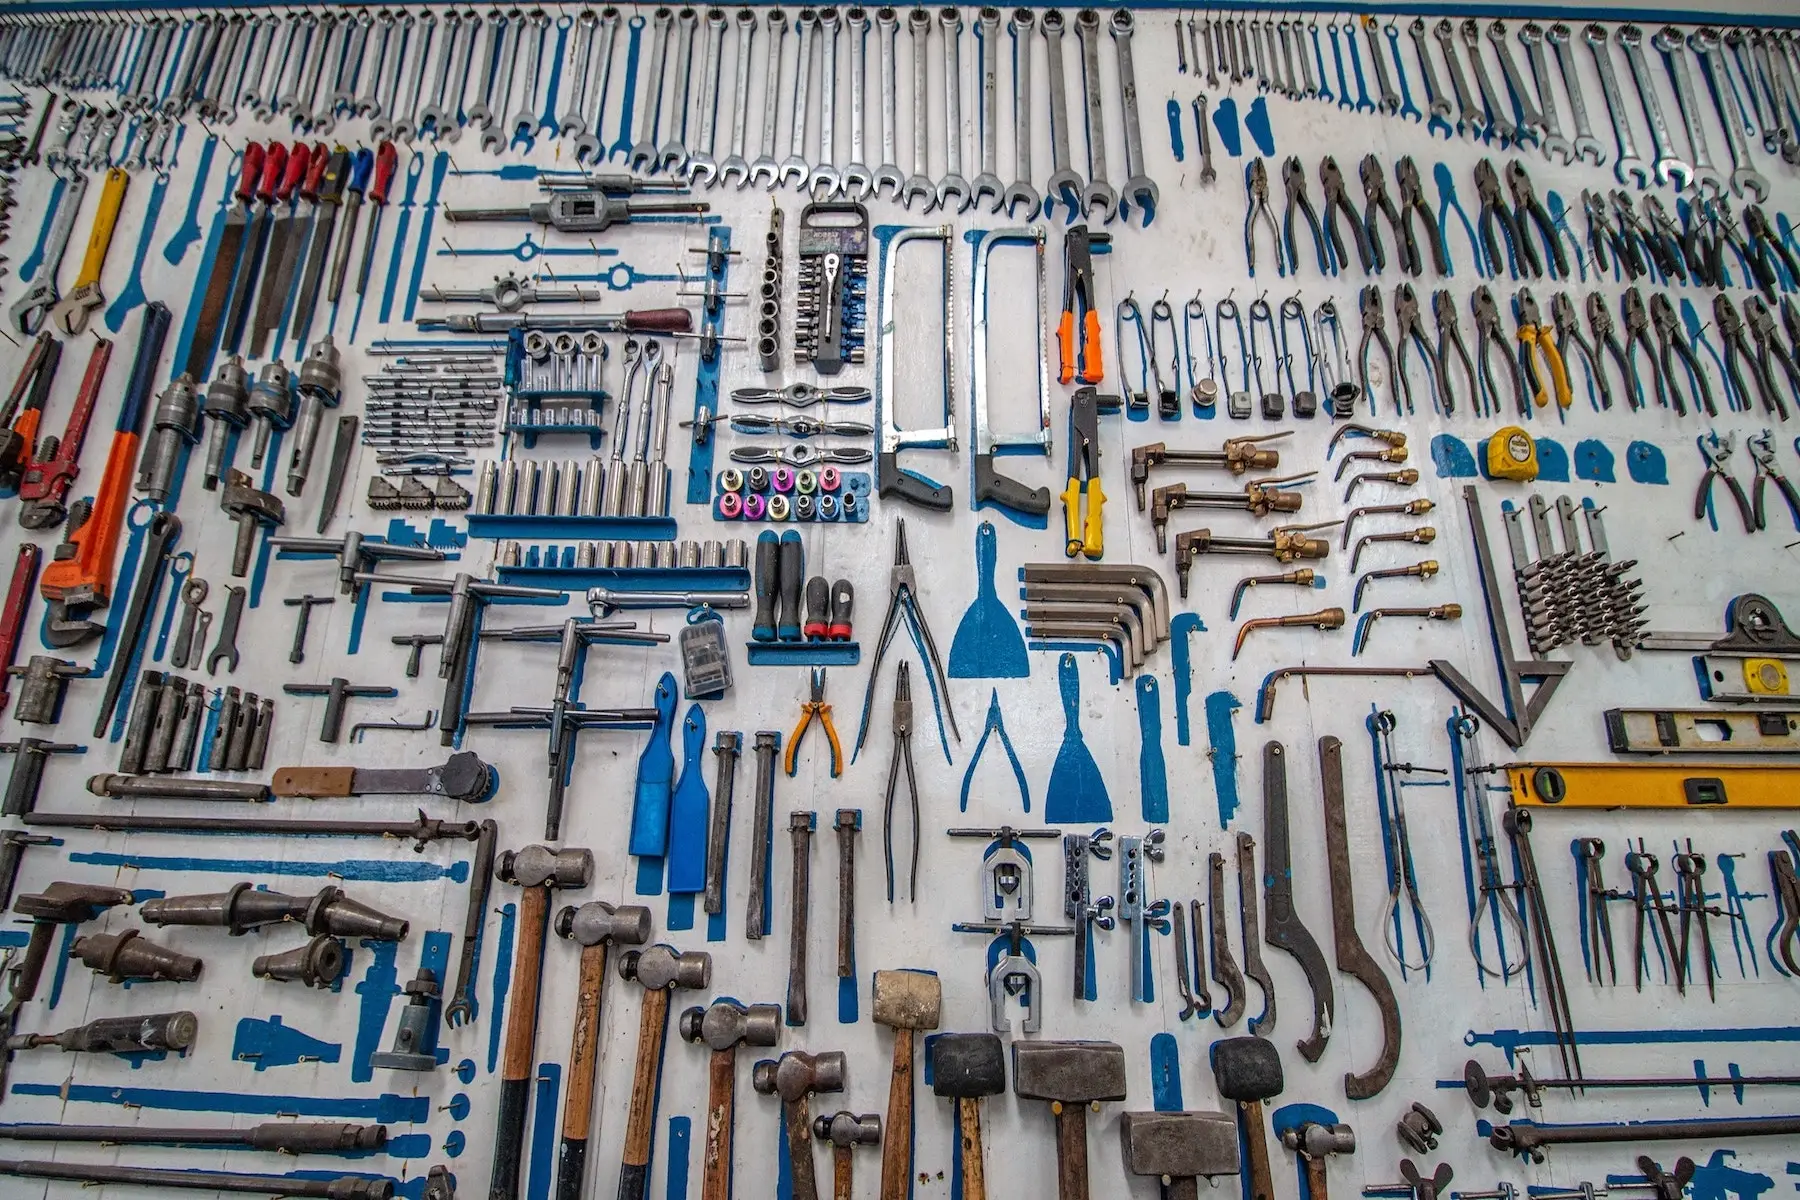 Tools laid out on concrete